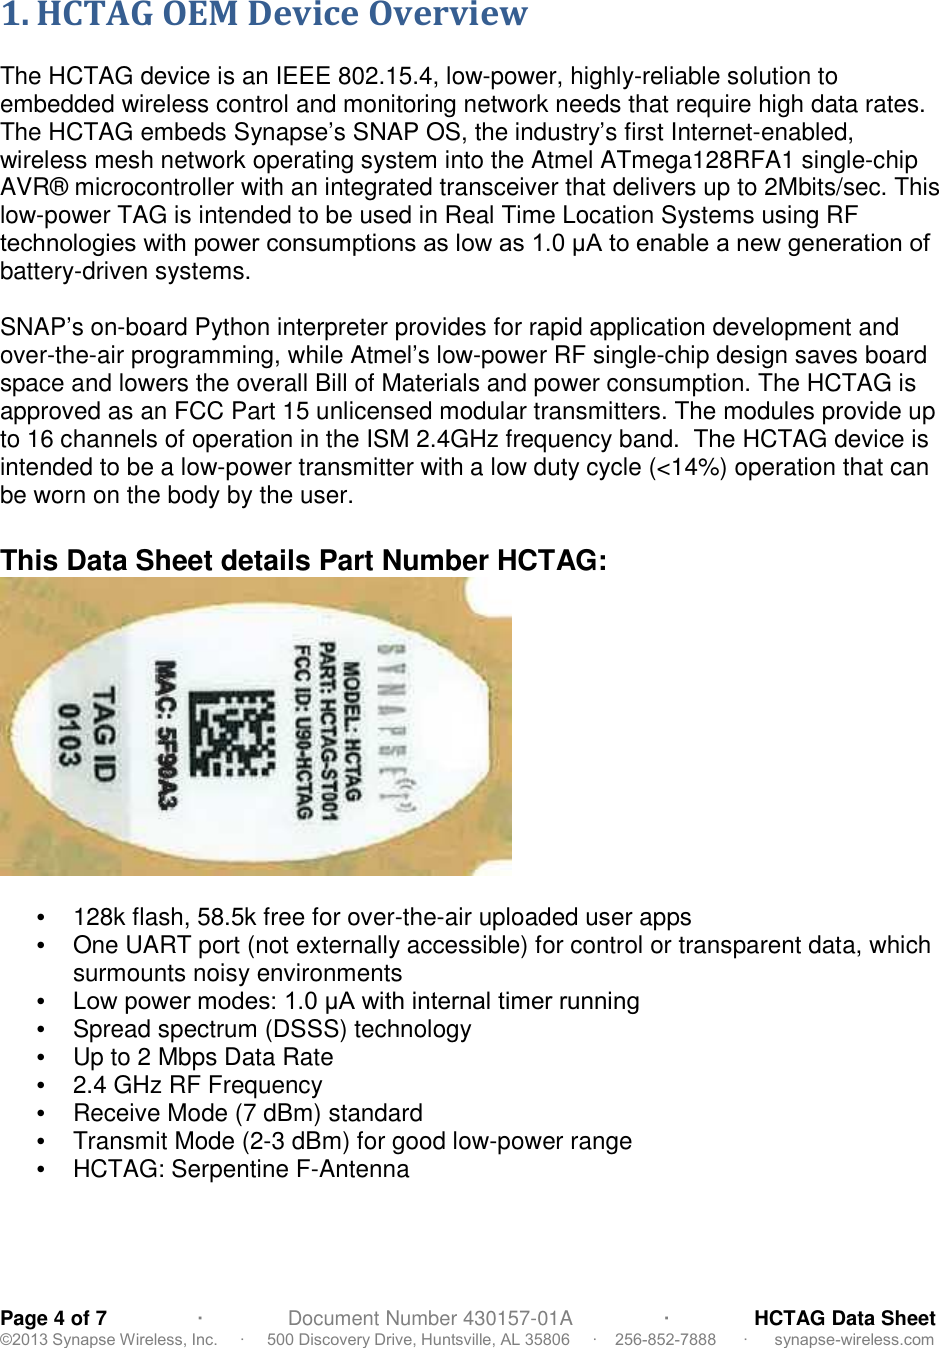 Page 4 of 7                ∙               Document Number 430157-01A                ∙               HCTAG Data Sheet©2013 Synapse Wireless, Inc.     ∙     500 Discovery Drive, Huntsville, AL 35806     ∙    256-852-7888      ∙      synapse-wireless.com 1. HCTAG OEM Device OverviewThe HCTAG device is an IEEE 802.15.4, low-power, highly-reliable solution toembedded wireless control and monitoring network needs that require high data rates.The HCTAG embeds Synapse’s SNAP OS, the industry’s first Internet-enabled,wireless mesh network operating system into the Atmel ATmega128RFA1 single-chipAVR® microcontroller with an integrated transceiver that delivers up to 2Mbits/sec. Thislow-power TAG is intended to be used in Real Time Location Systems using RFtechnologies with power consumptions as low as 1.0 μA to enable a new generation of battery-driven systems.SNAP’s on-board Python interpreter provides for rapid application development andover-the-air programming, while Atmel’s low-power RF single-chip design saves boardspace and lowers the overall Bill of Materials and power consumption. The HCTAG isapproved as an FCC Part 15 unlicensed modular transmitters. The modules provide upto 16 channels of operation in the ISM 2.4GHz frequency band. The HCTAG device isintended to be a low-power transmitter with a low duty cycle (&lt;14%) operation that canbe worn on the body by the user.This Data Sheet details Part Number HCTAG:•128k flash, 58.5k free for over-the-air uploaded user apps•One UART port (not externally accessible) for control or transparent data, whichsurmounts noisy environments•  Low power modes: 1.0 μA with internal timer running •Spread spectrum (DSSS) technology•Up to 2 Mbps Data Rate•2.4 GHz RF Frequency•Receive Mode (7 dBm) standard•Transmit Mode (2-3 dBm) for good low-power range•HCTAG: Serpentine F-Antenna